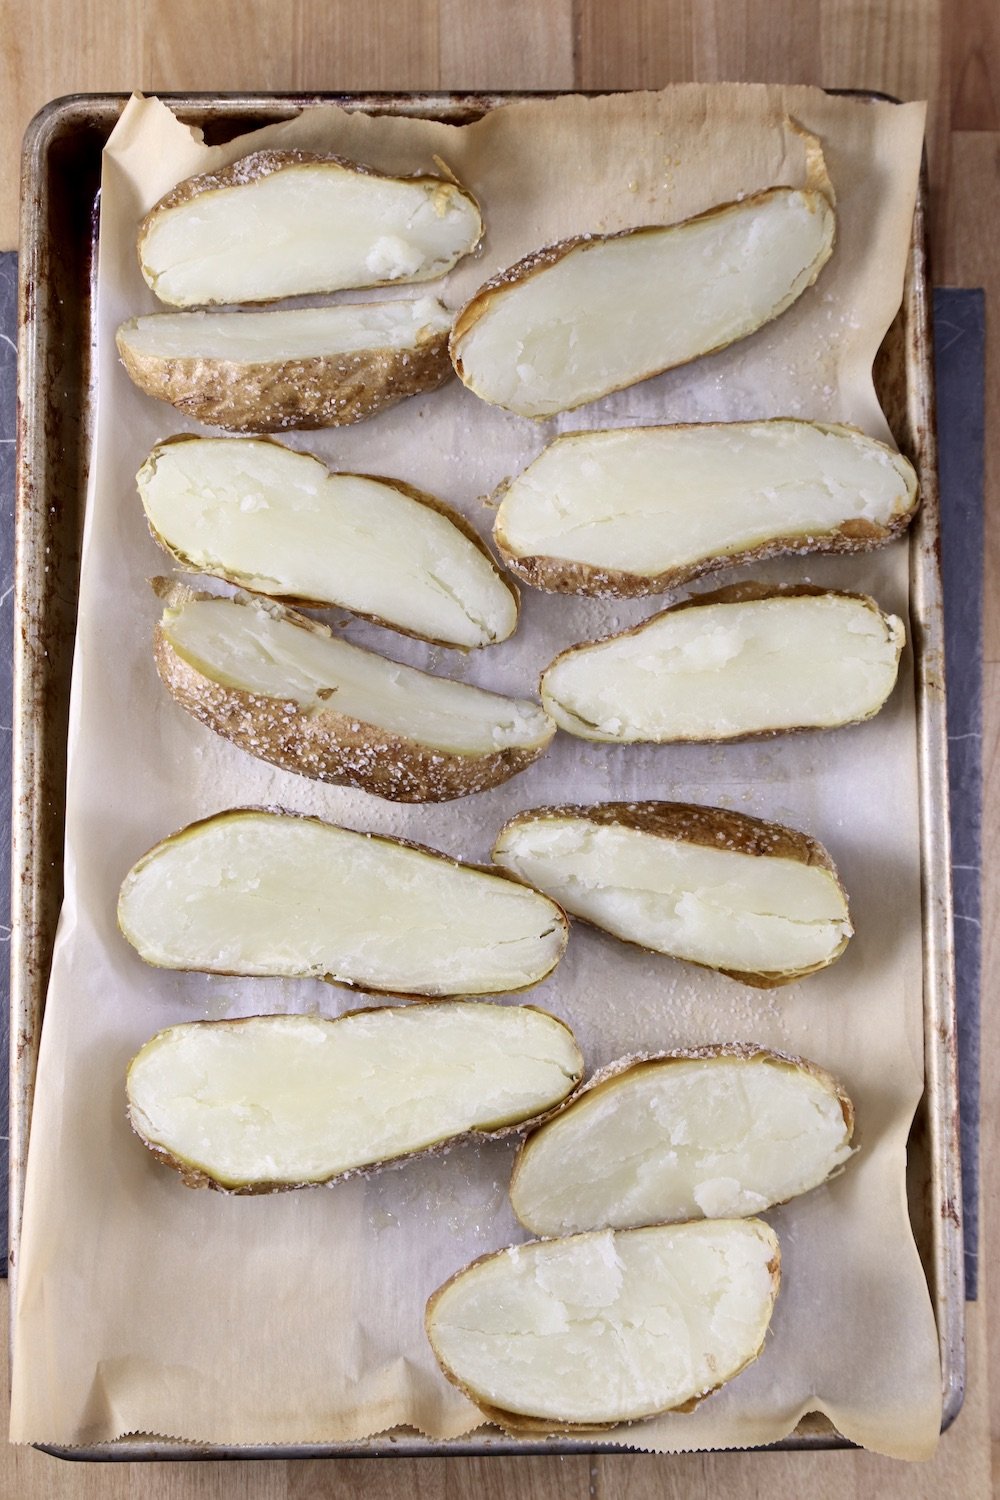 baked potatoes sliced in half on a baking sheet